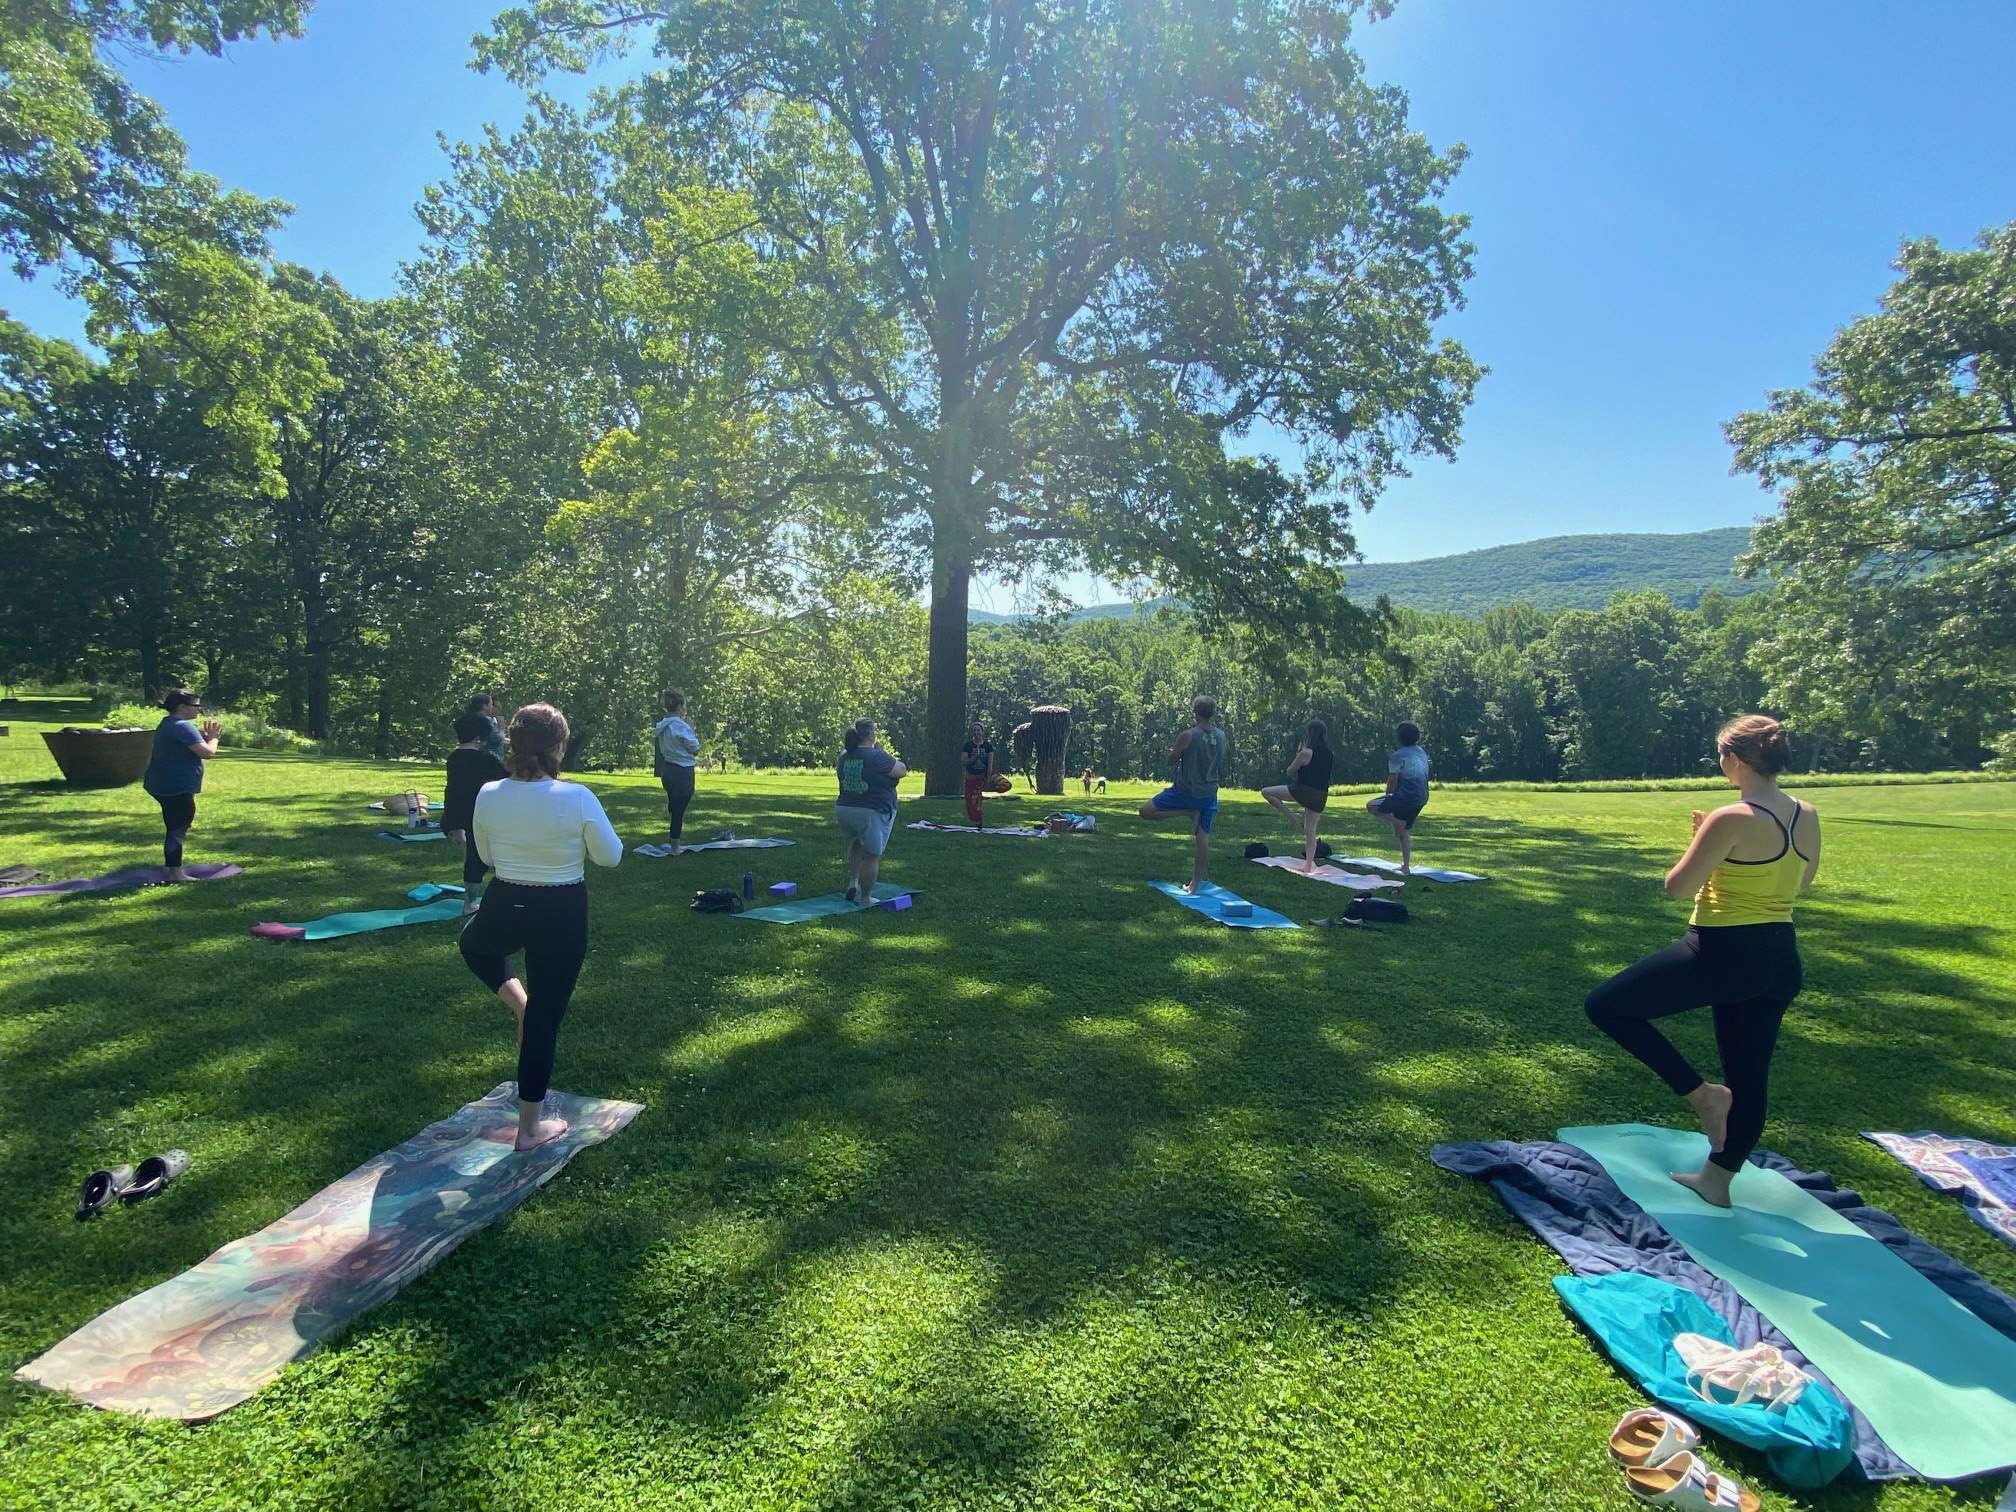 People spread out on a grassy hillside standing on blankets and yoga mats with a blue sky and mountains in the distance.